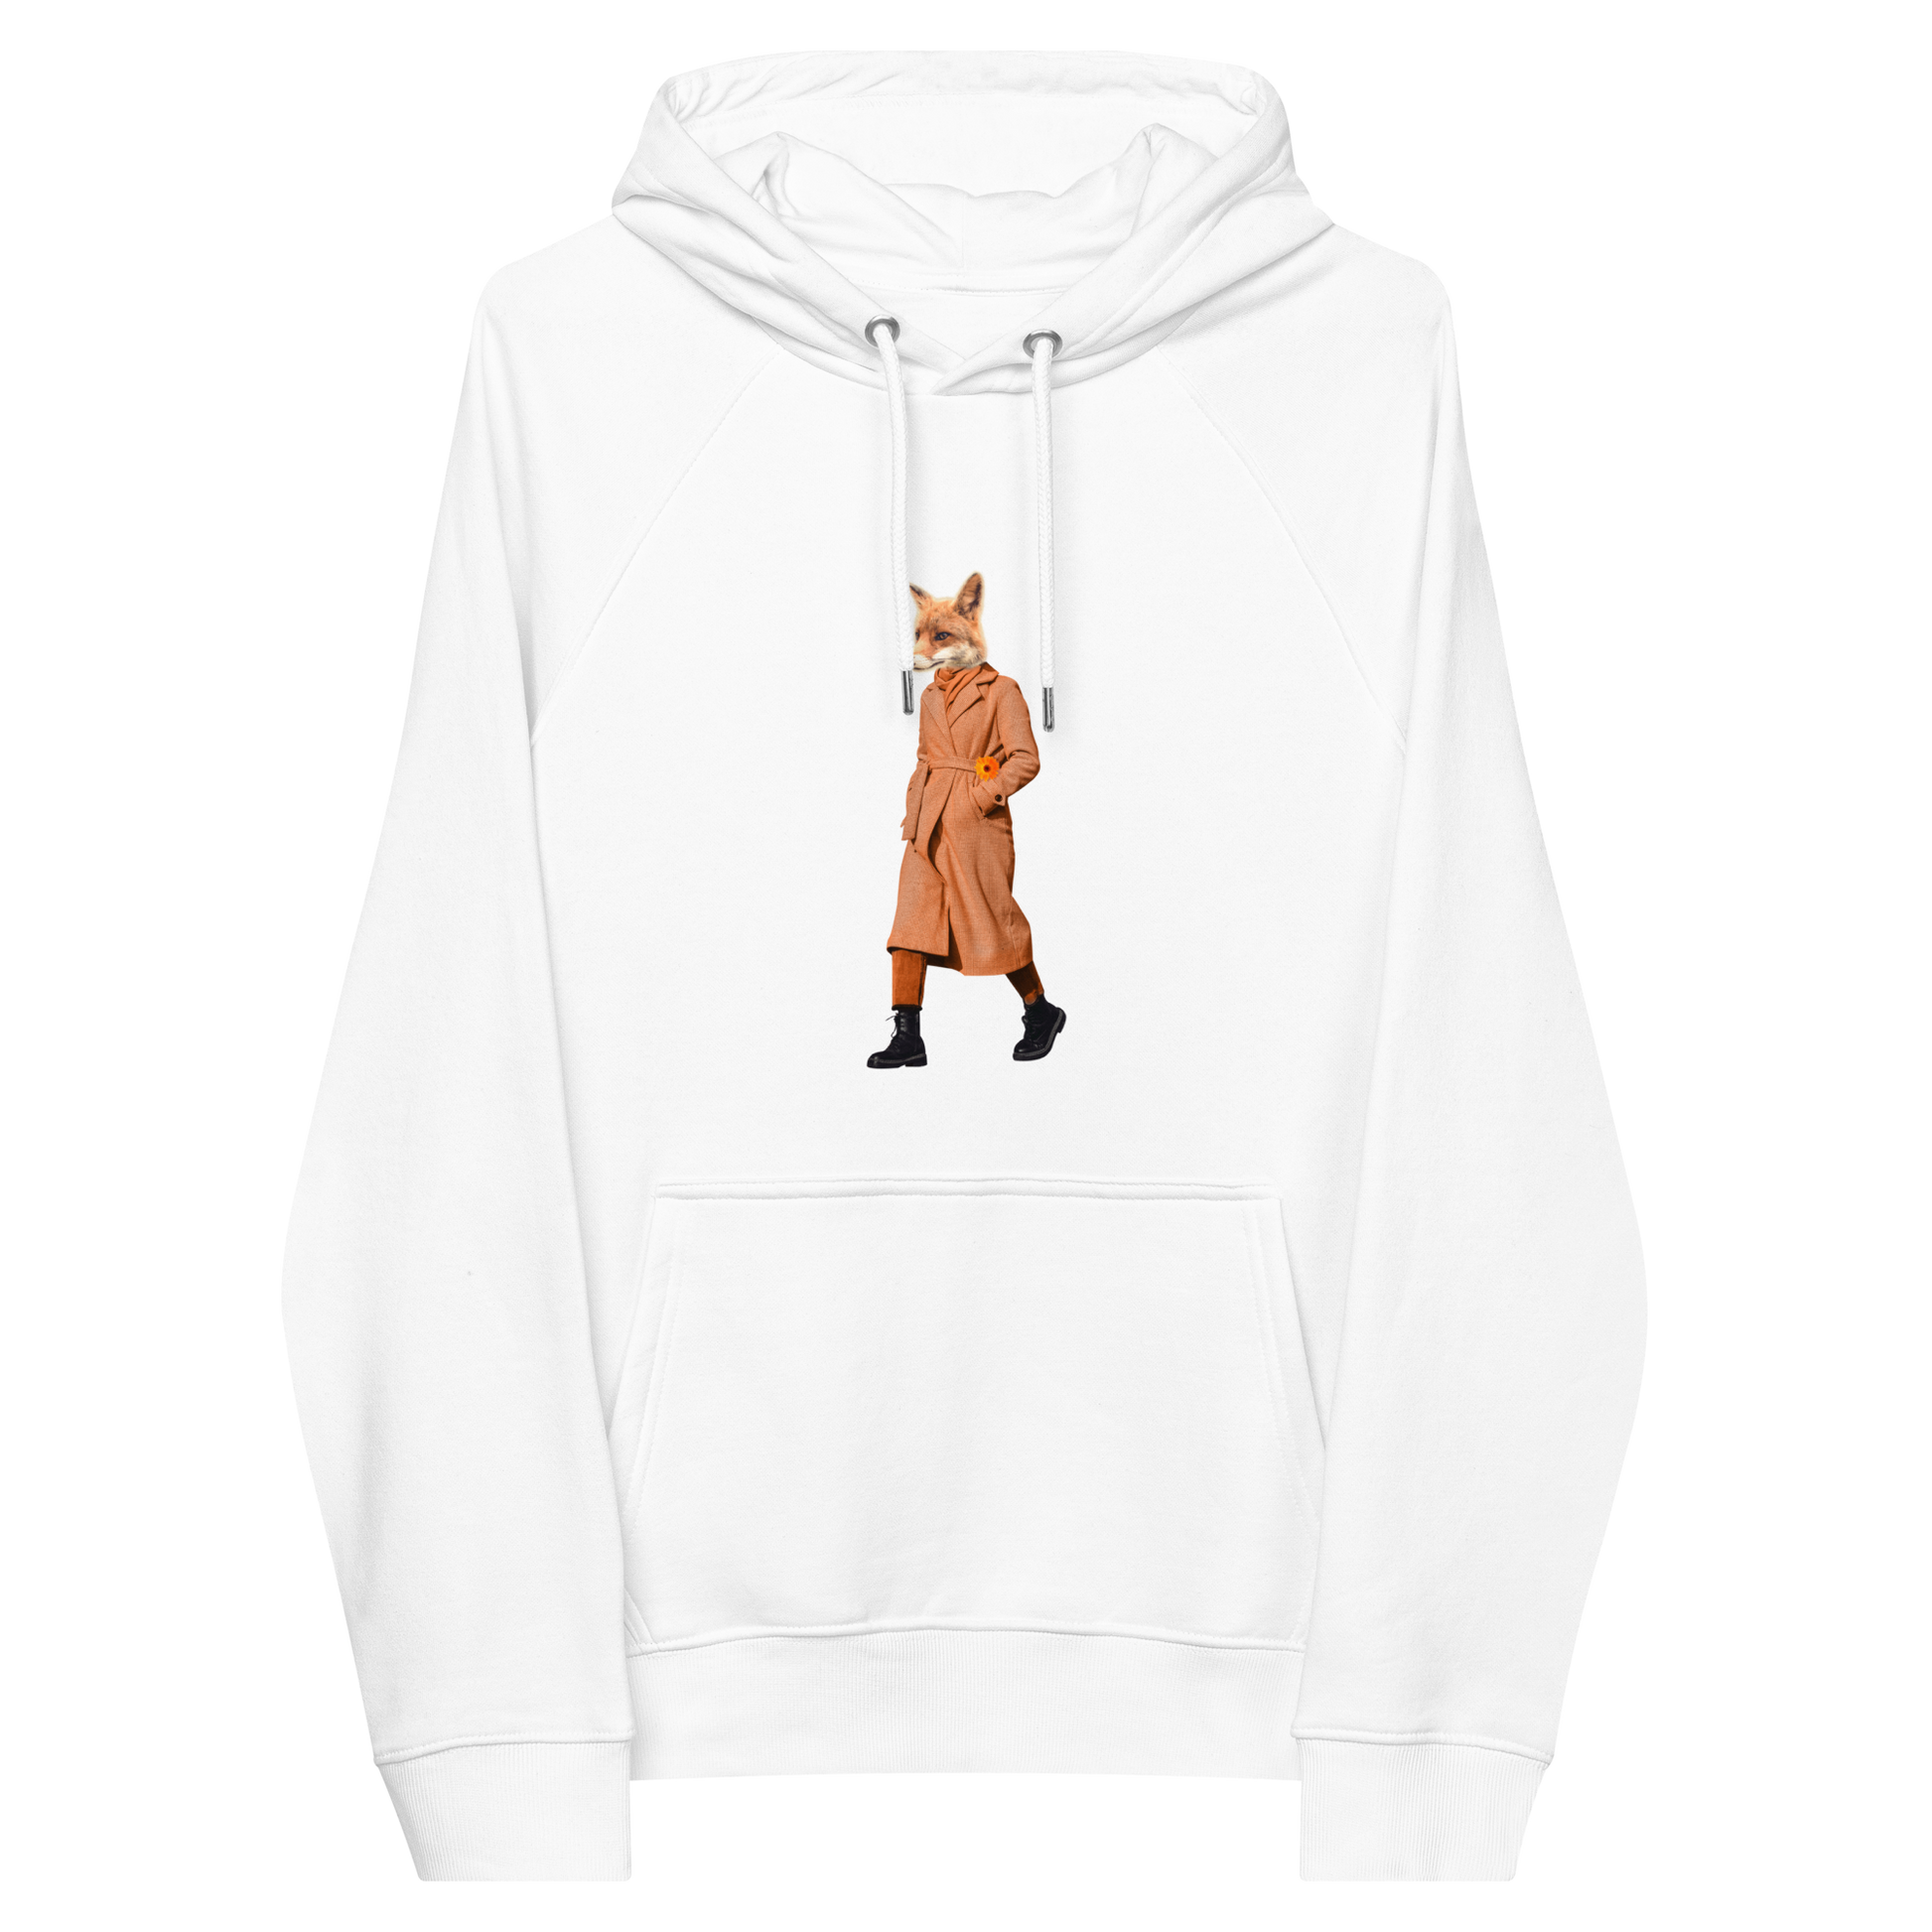 White Anthropomorphic Fox Raglan Hoodie featuring a sly Anthropomorphic Fox in a Trench Coat graphic on the chest - Funny Graphic Fox Hoodies - Boozy Fox